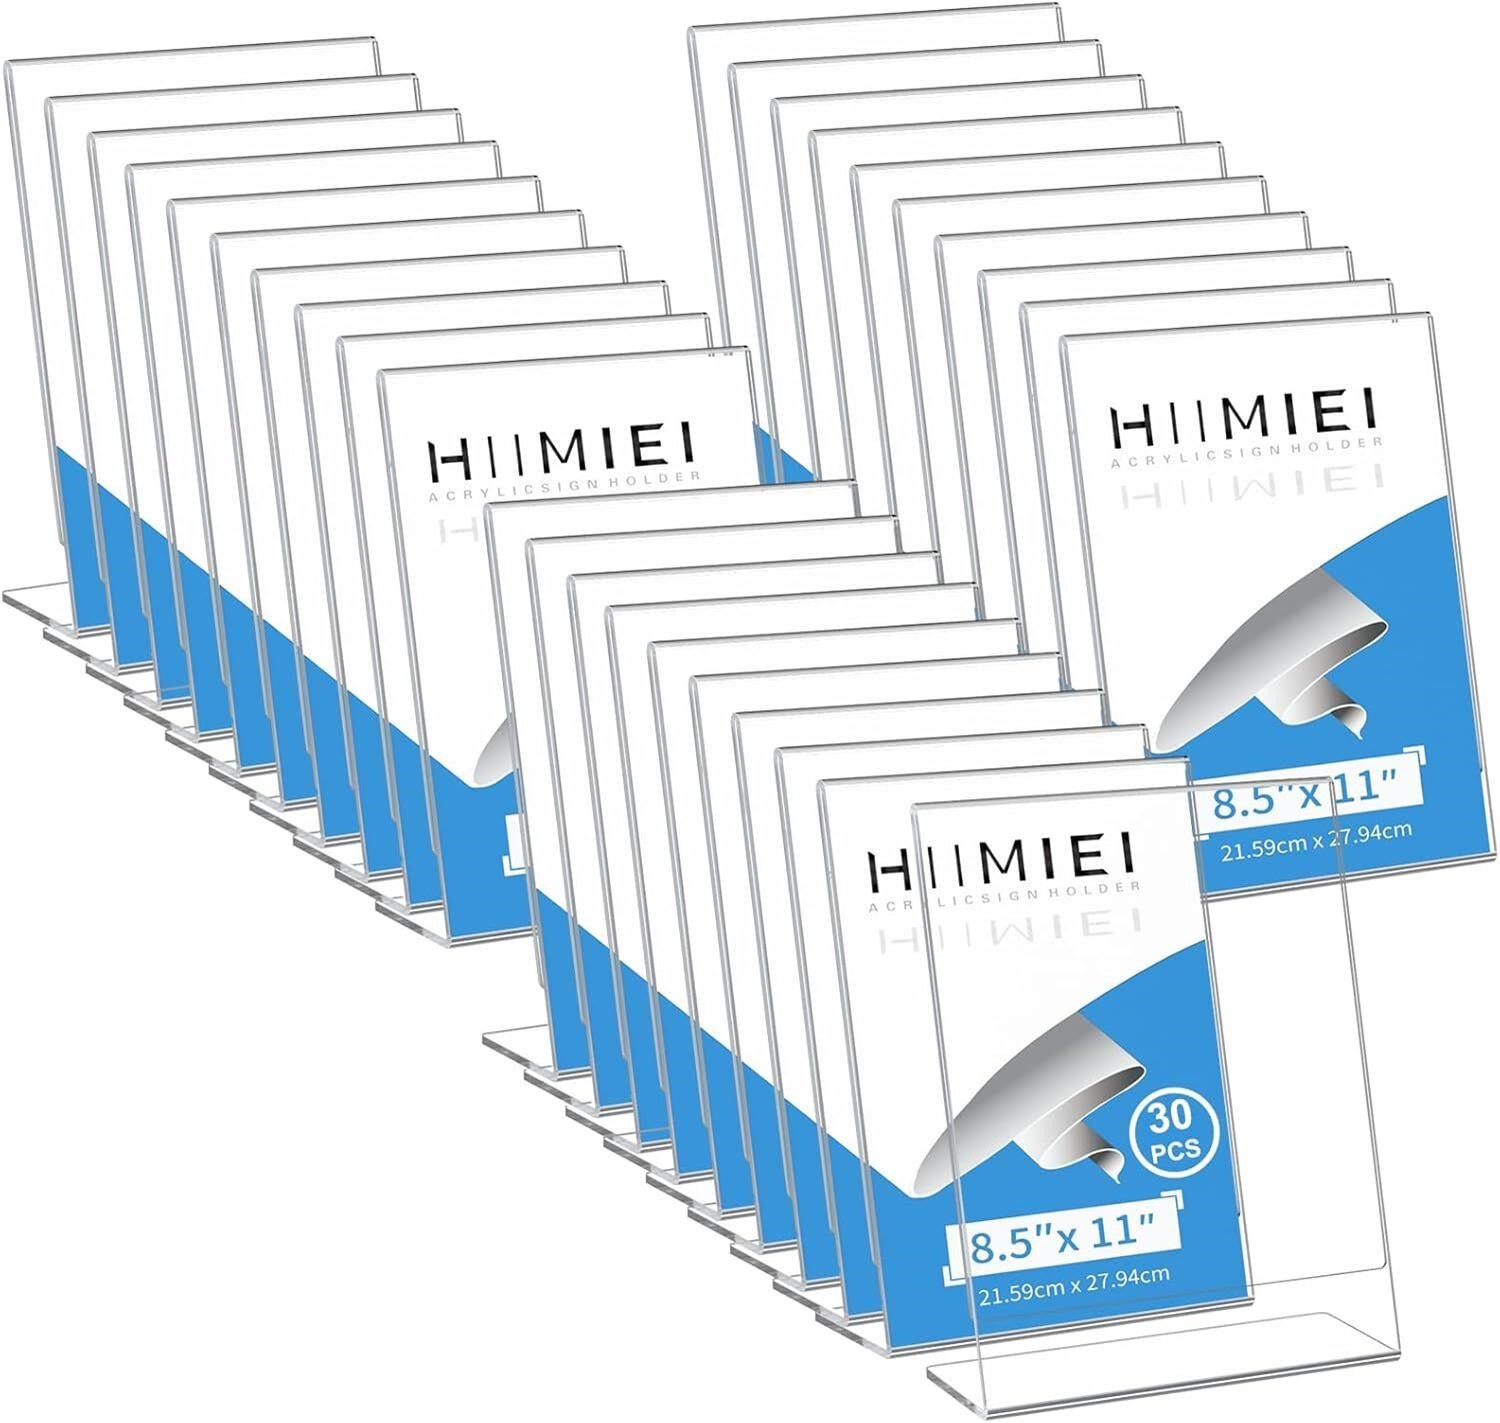 HIIMIEI 8.5x11 Acrylic Sign Holder  Pack of 30